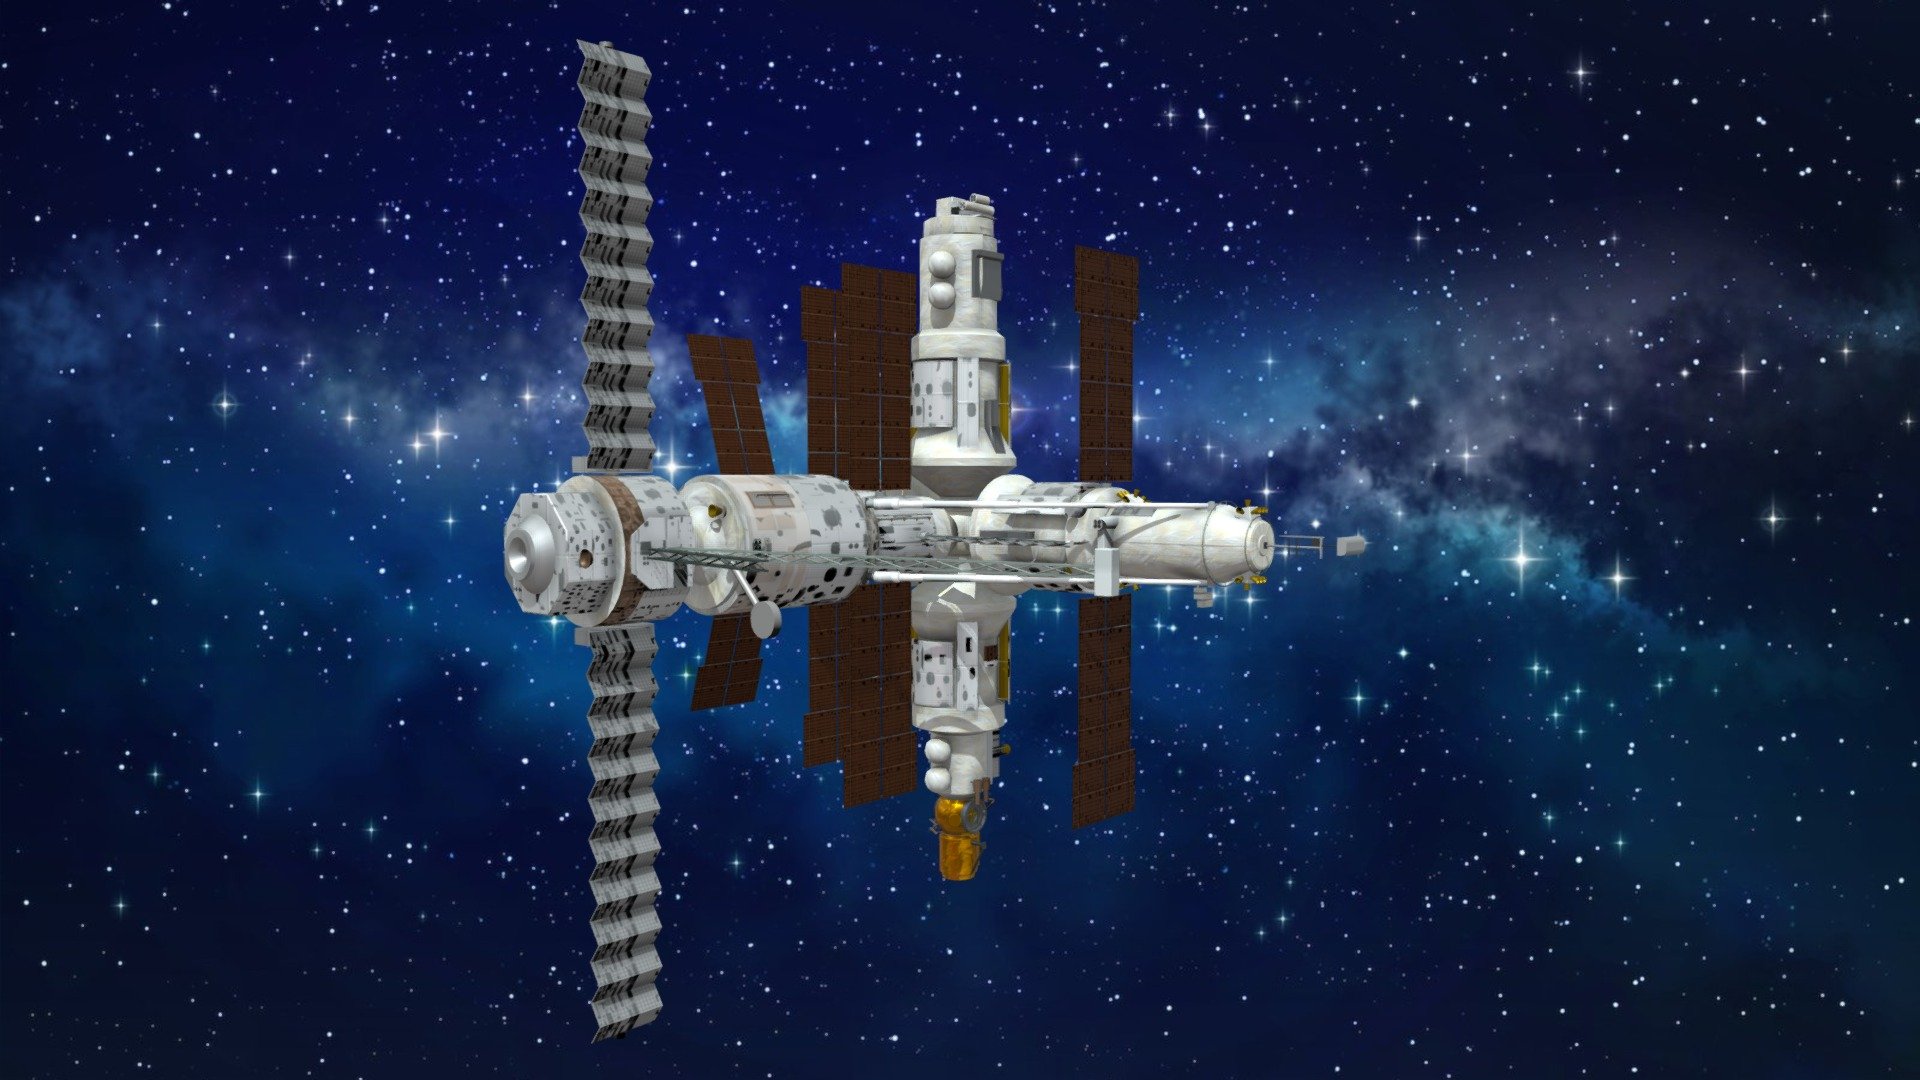 The Soviet Mir Space Station, known simply as “Mir,” was an enduring symbol of human space exploration. Launched on February 20, 1986, Mir became the first modular space station, operating in low Earth orbit for 15 years. The space station was deliberately deorbited and re-entered Earth’s atmosphere in 2001

Mir served as a remarkable platform for scientific research and international cooperation. It hosted cosmonauts and astronauts from various nations, including Russia, the United States, Europe, and Japan. These crew members conducted experiments in biology, physics, astronomy, and Earth sciences, contributing to our understanding of space and life in microgravity.

Mir’s enduring presence allowed researchers to study the long-term effects of space travel on the human body, providing essential data for future space missions. Its legacy also paved the way for the International Space Station (ISS), highlighting the potential of international collaboration in space 3d model